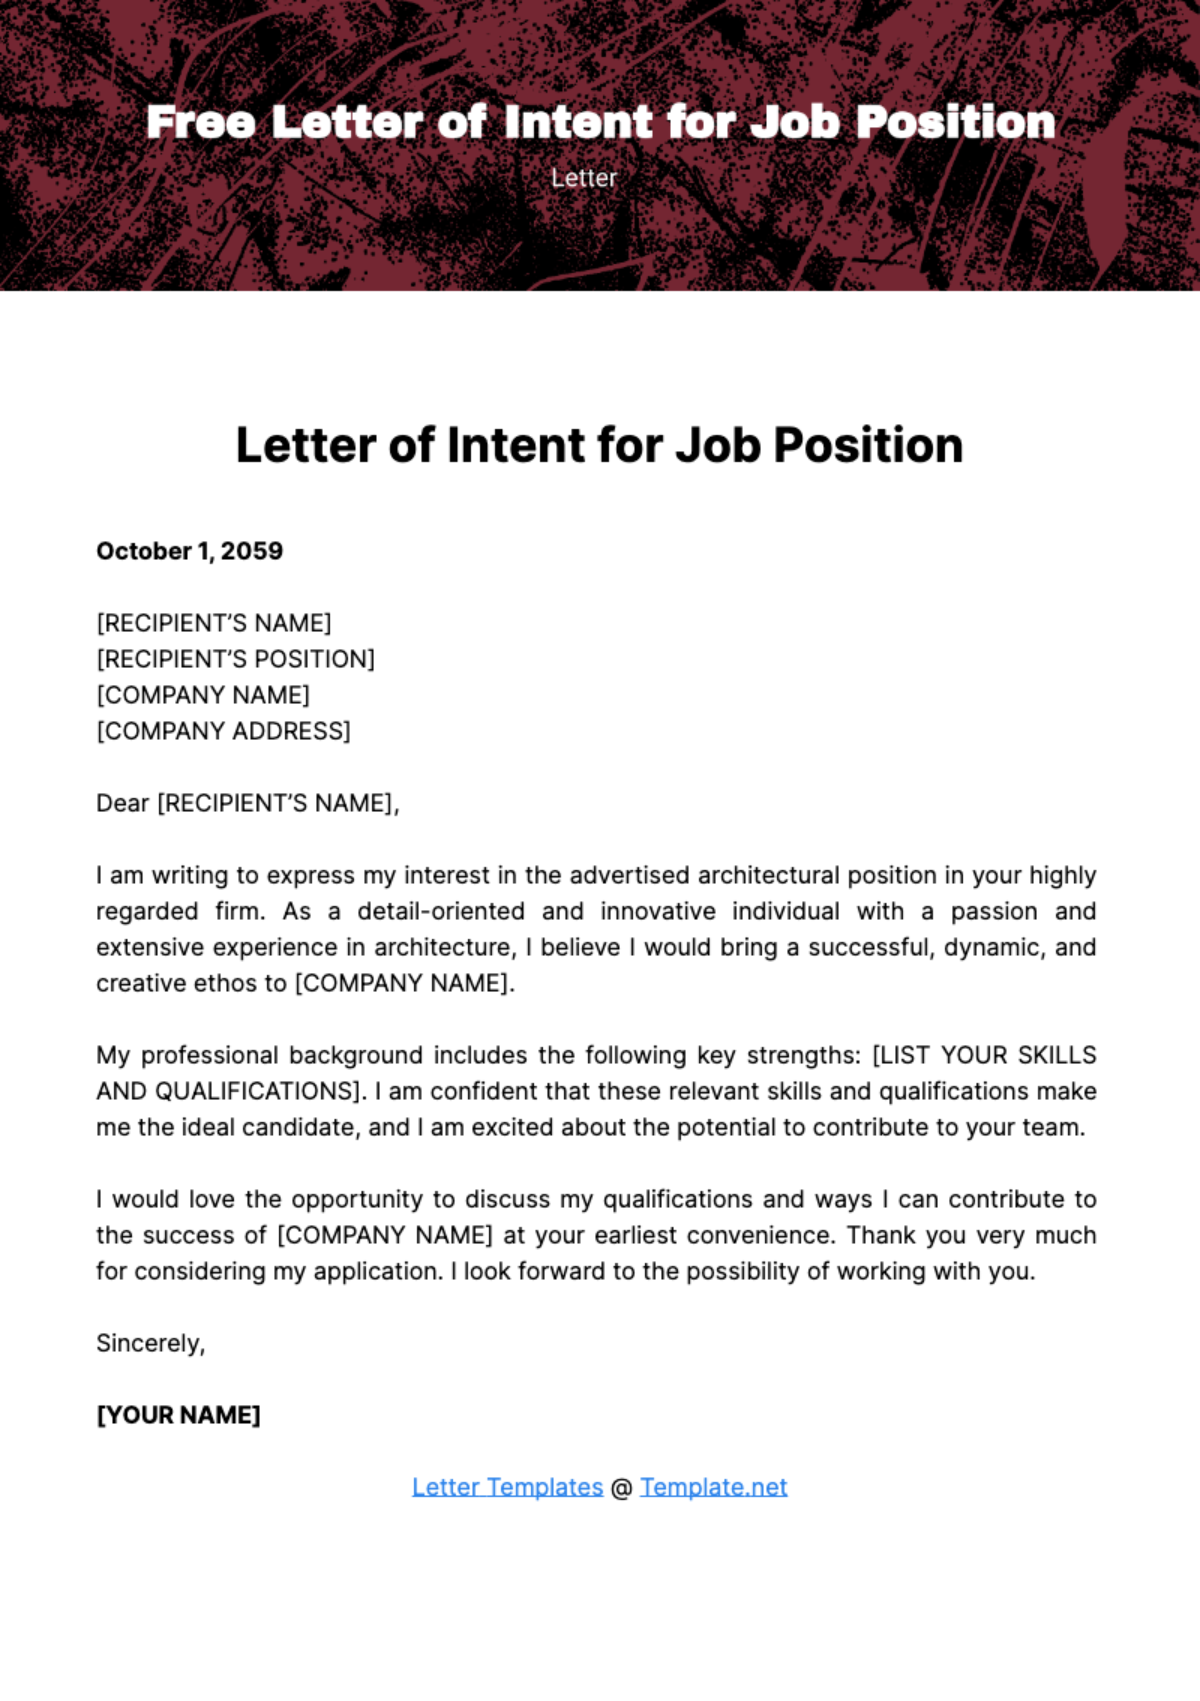 Free Letter of Intent for Job Position Template